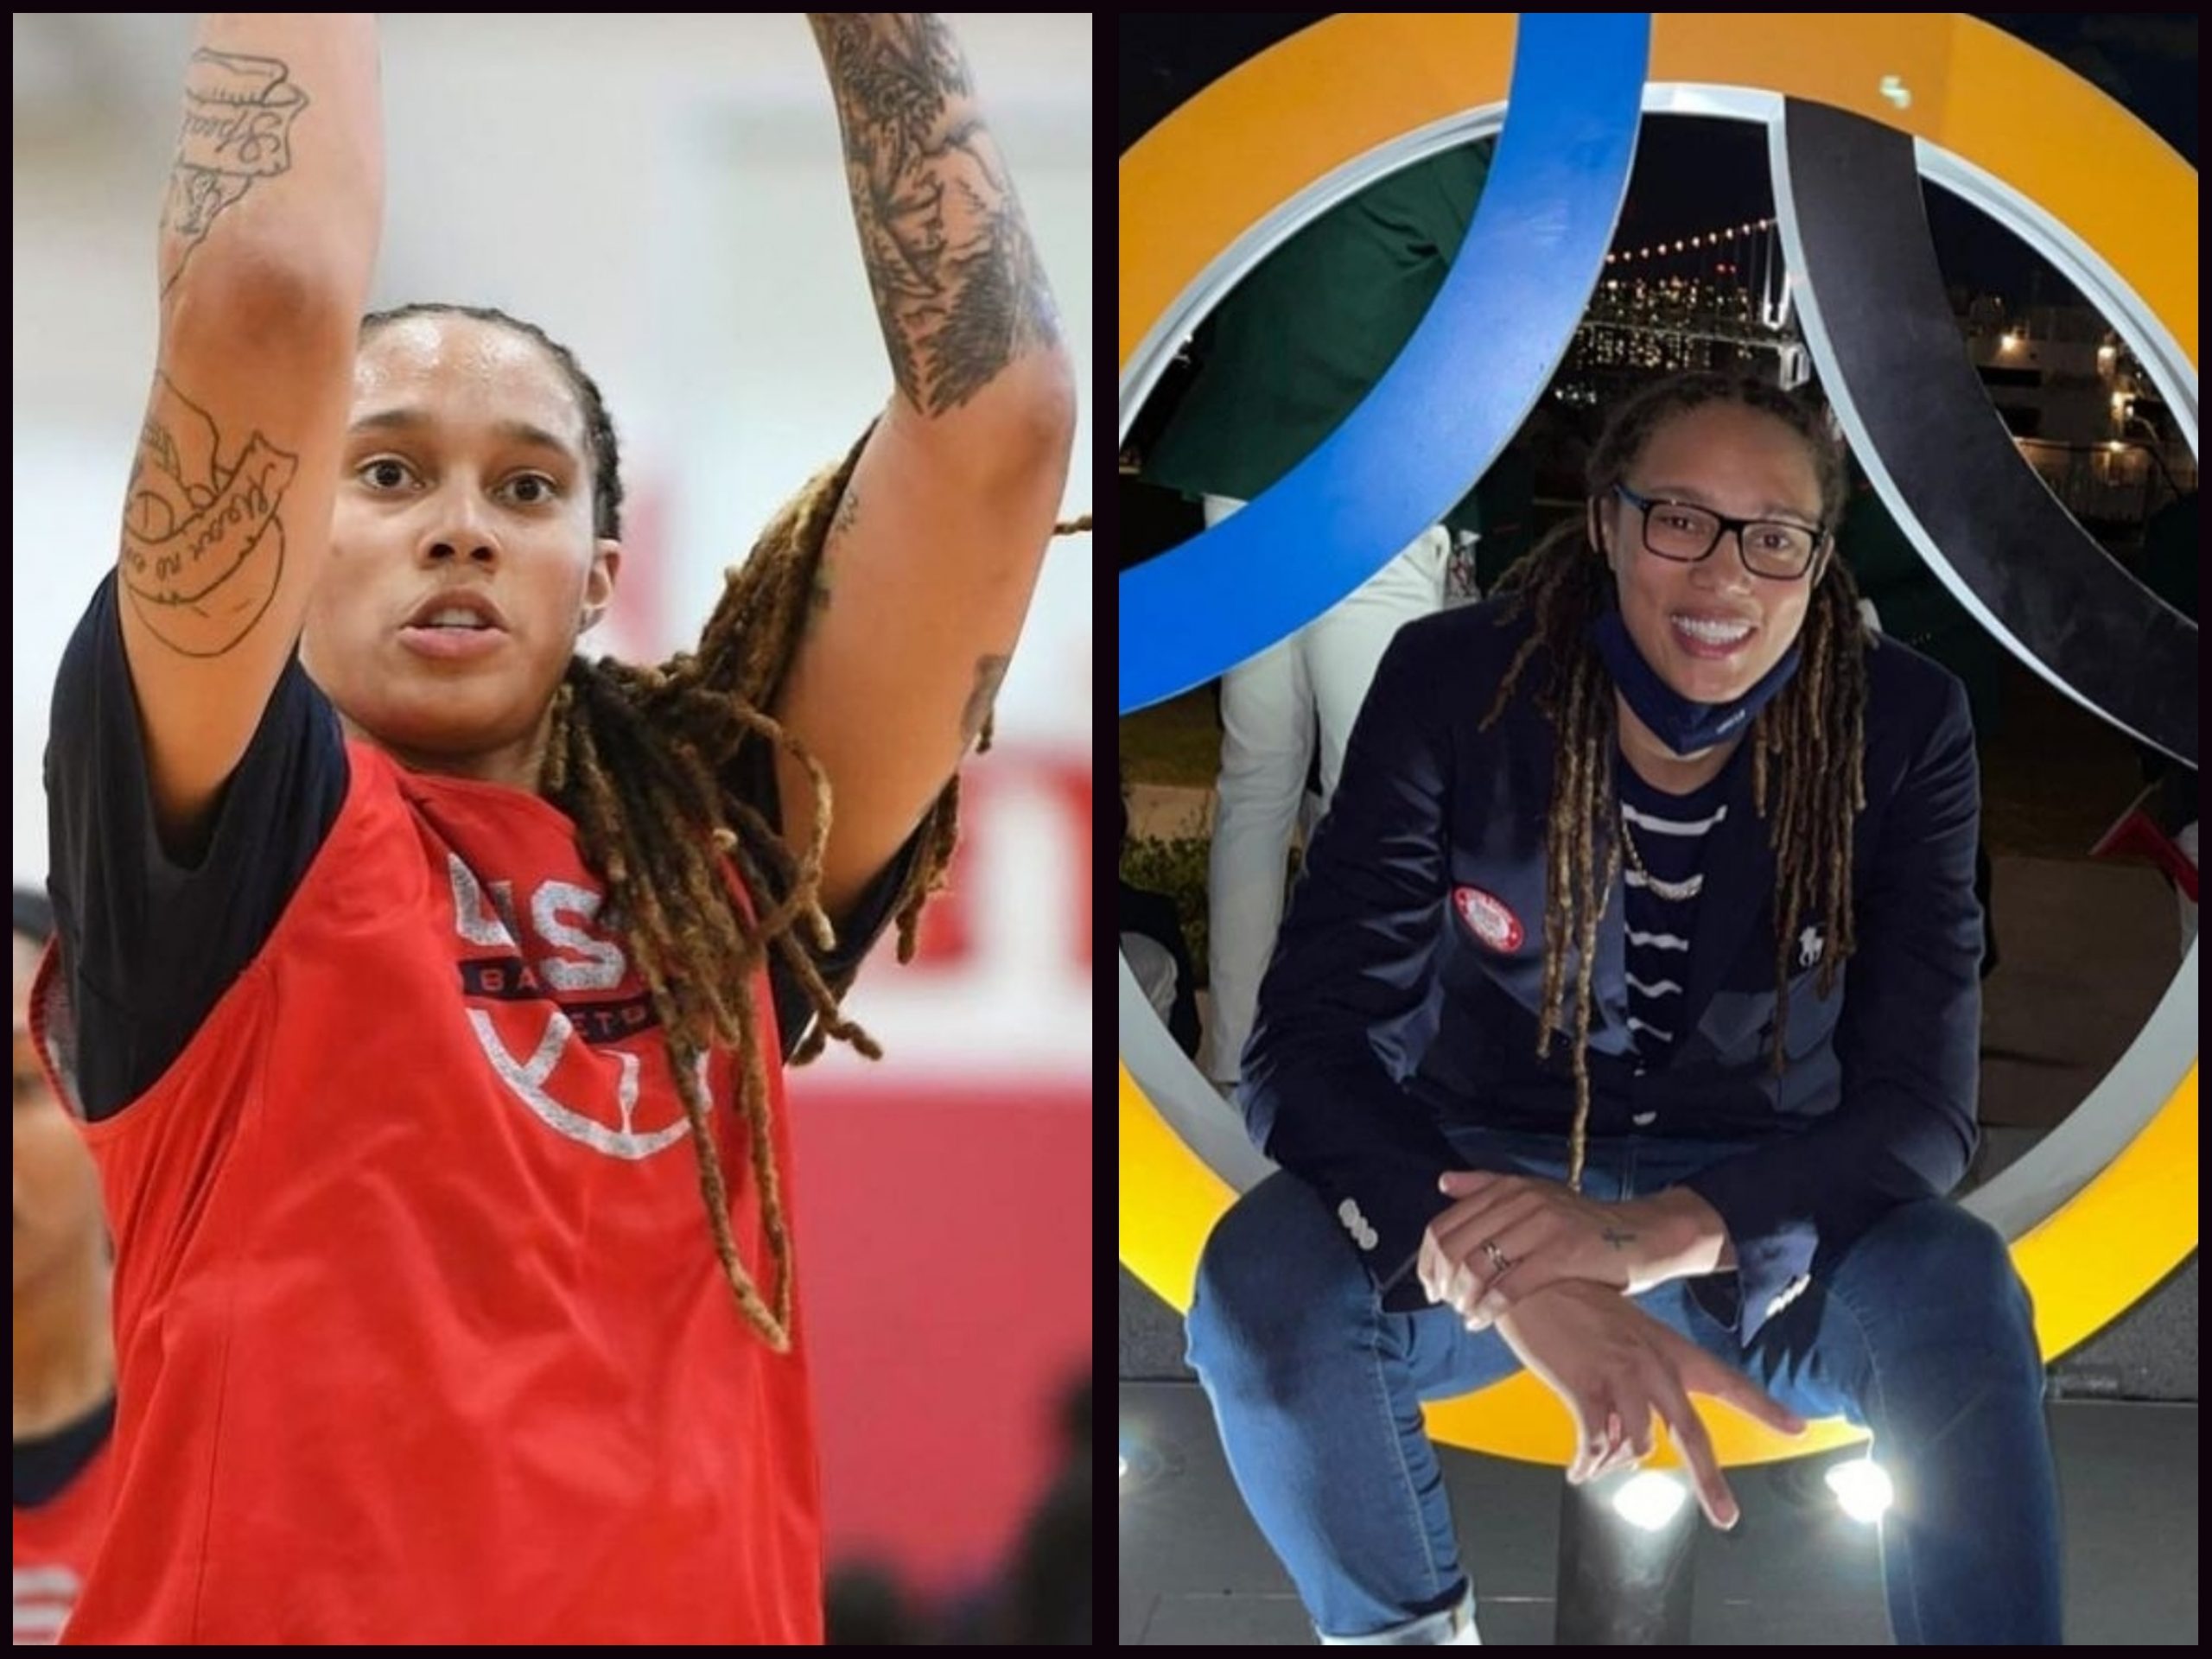 WNBA Star Brittney Griner Sentenced To 9 Years In Russian Jail